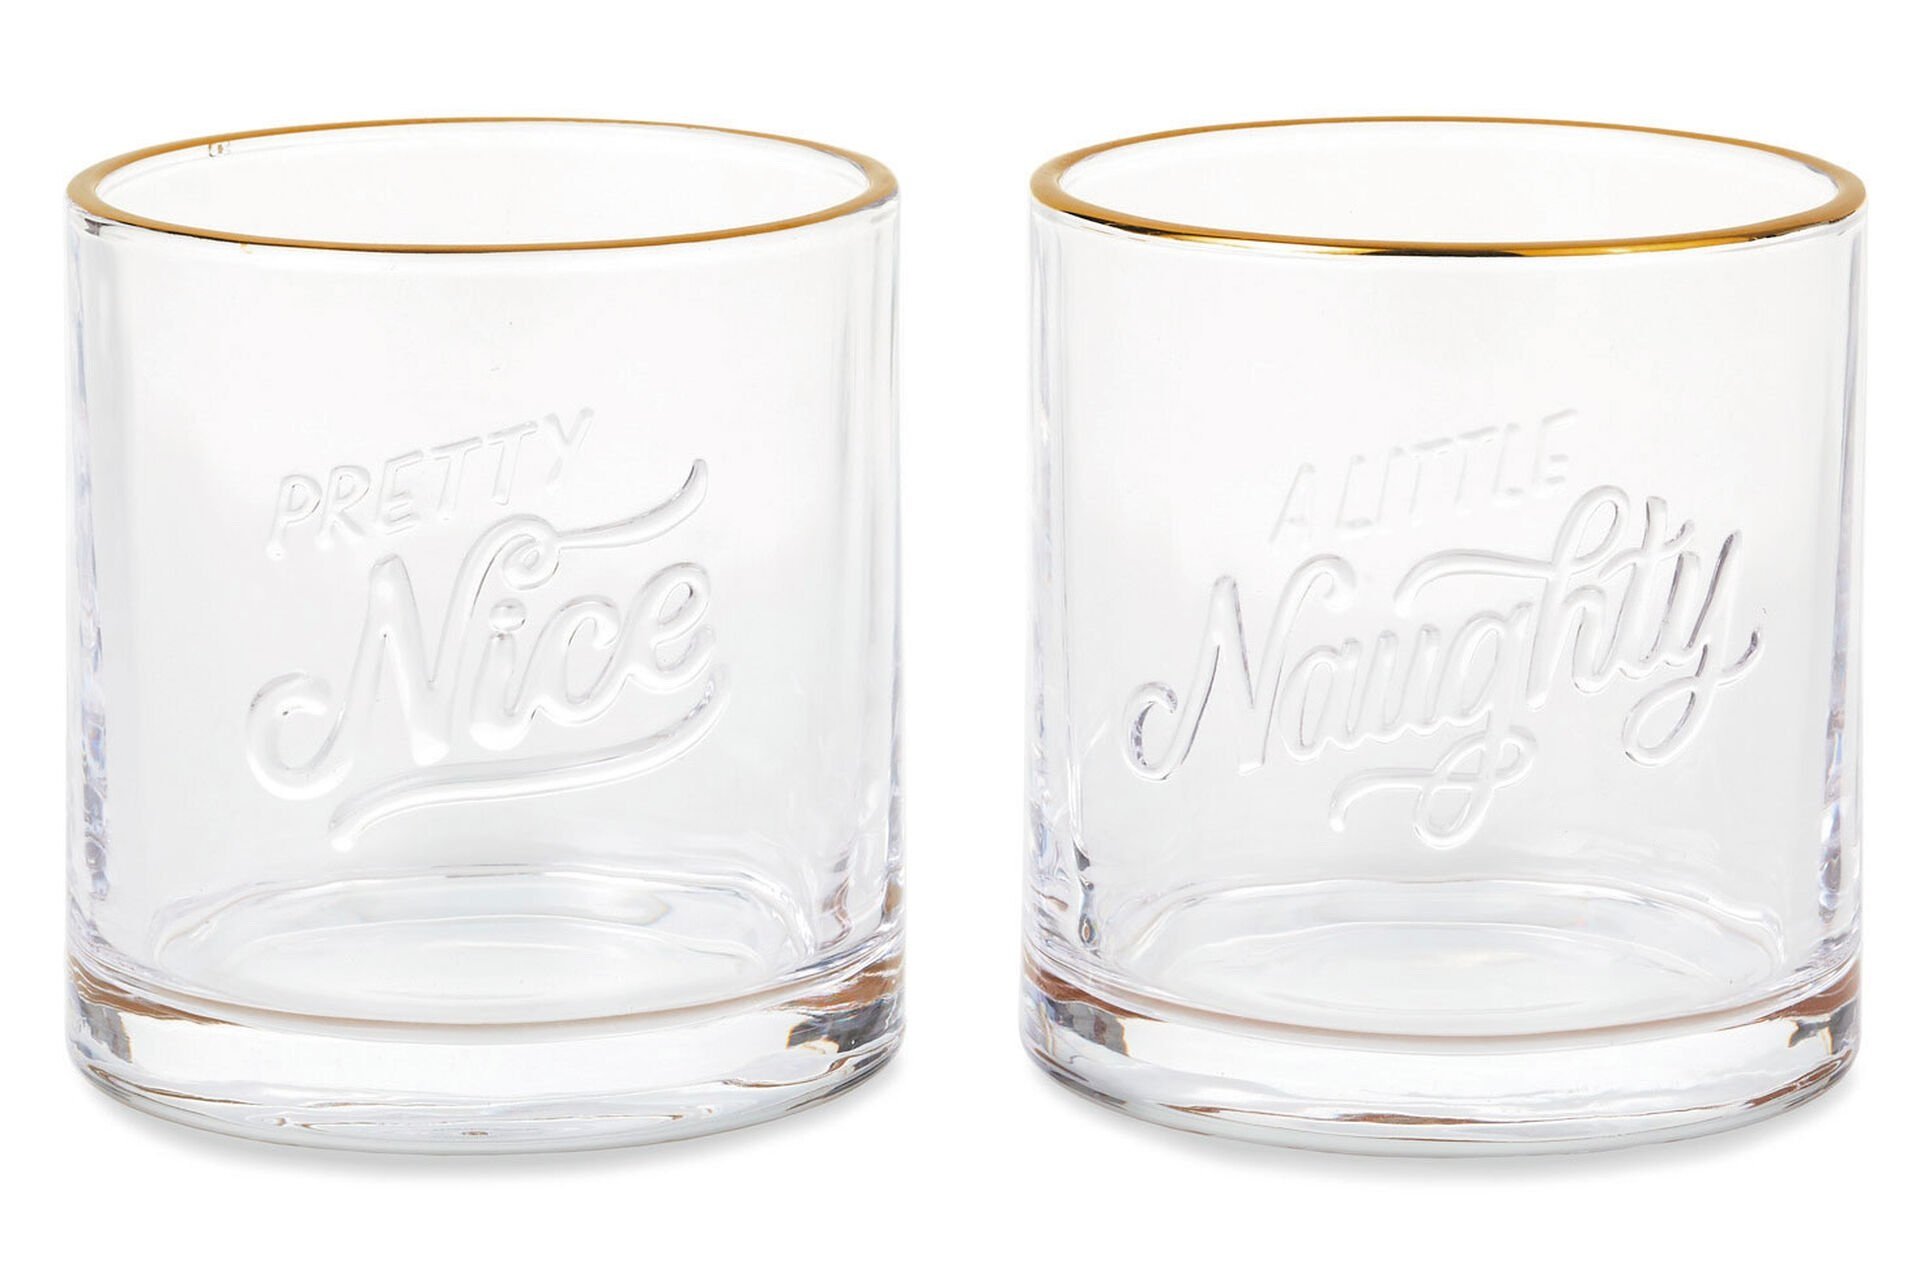 Nice-and-Naughty-OldFashioned-Glasses-Set-of-2_1XKT3307_01.jpg